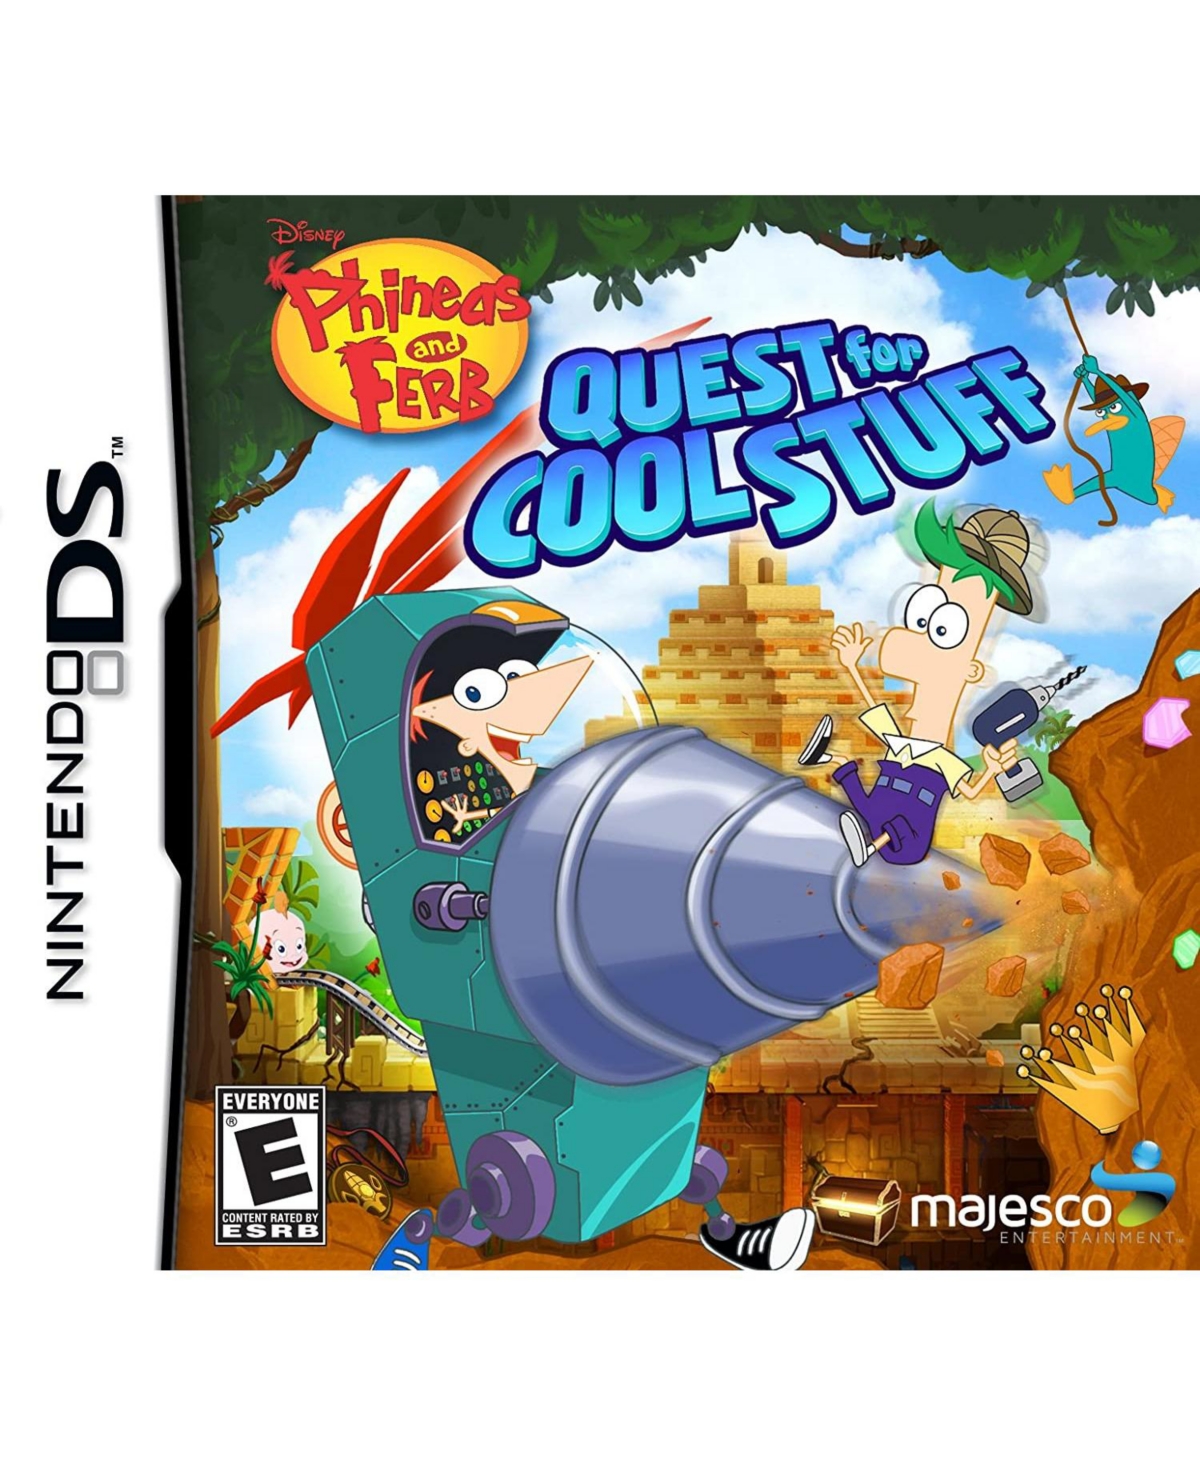 Nintendo Phineas & Ferb Quest For Cool Stuff -  Ds In Multi